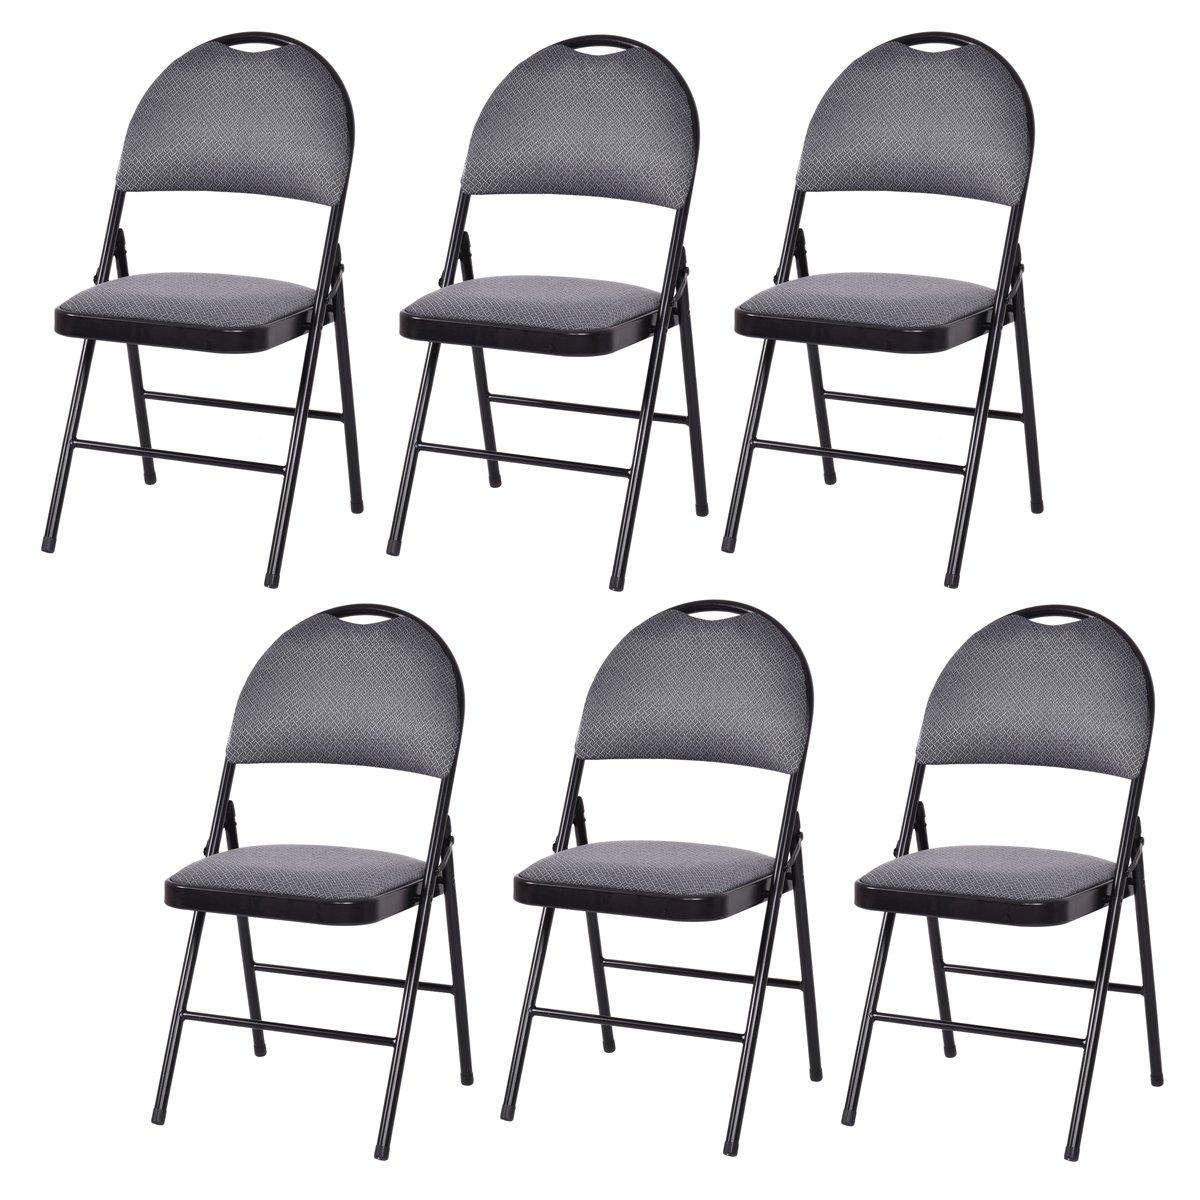 Set of 6 Folding Chair Armless Padded Kitchen Dining Seat Portable Guest Chair